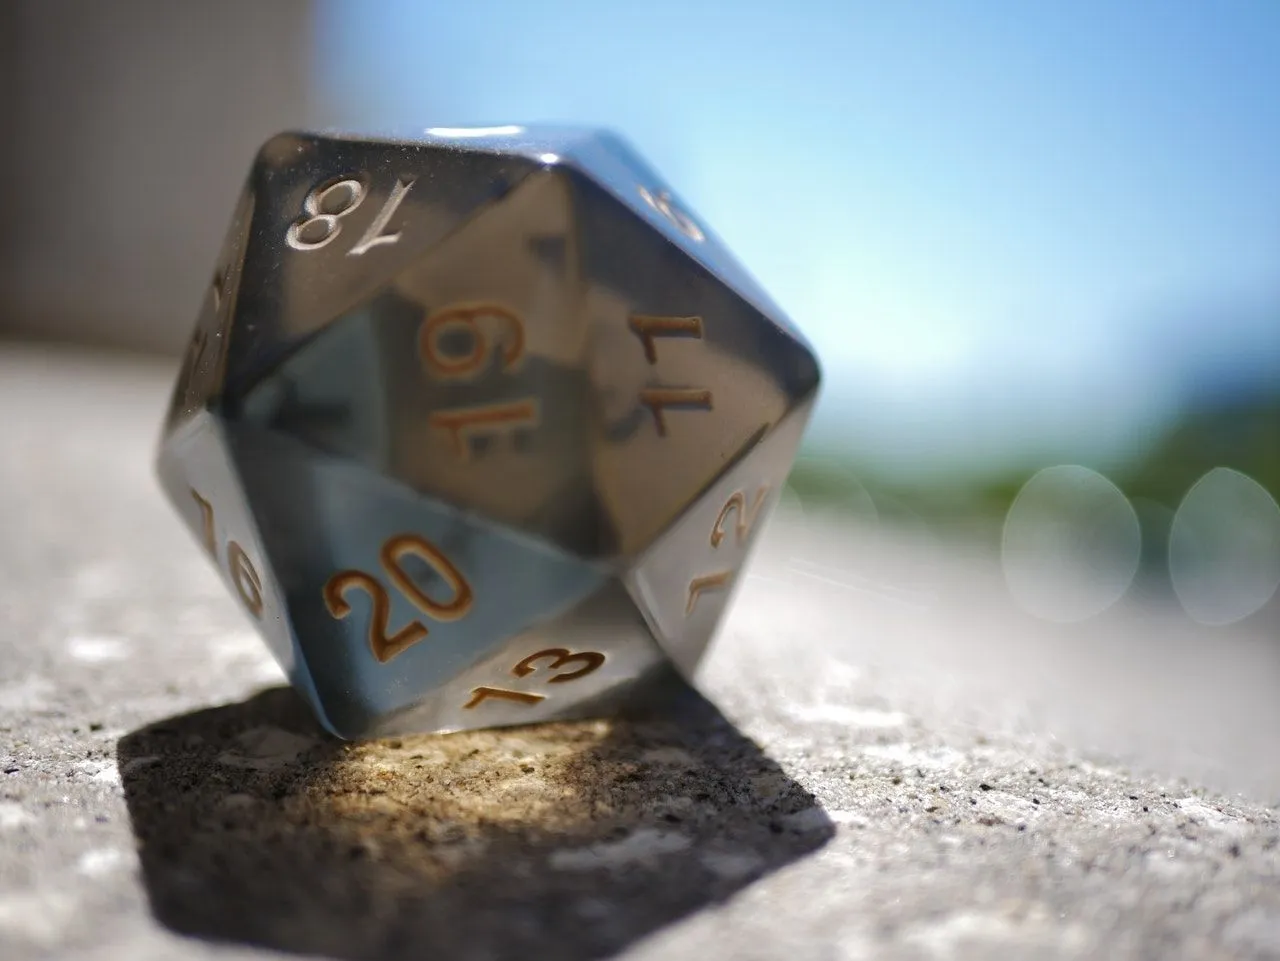 SIlver black d20 dice from Dungeons and dragons